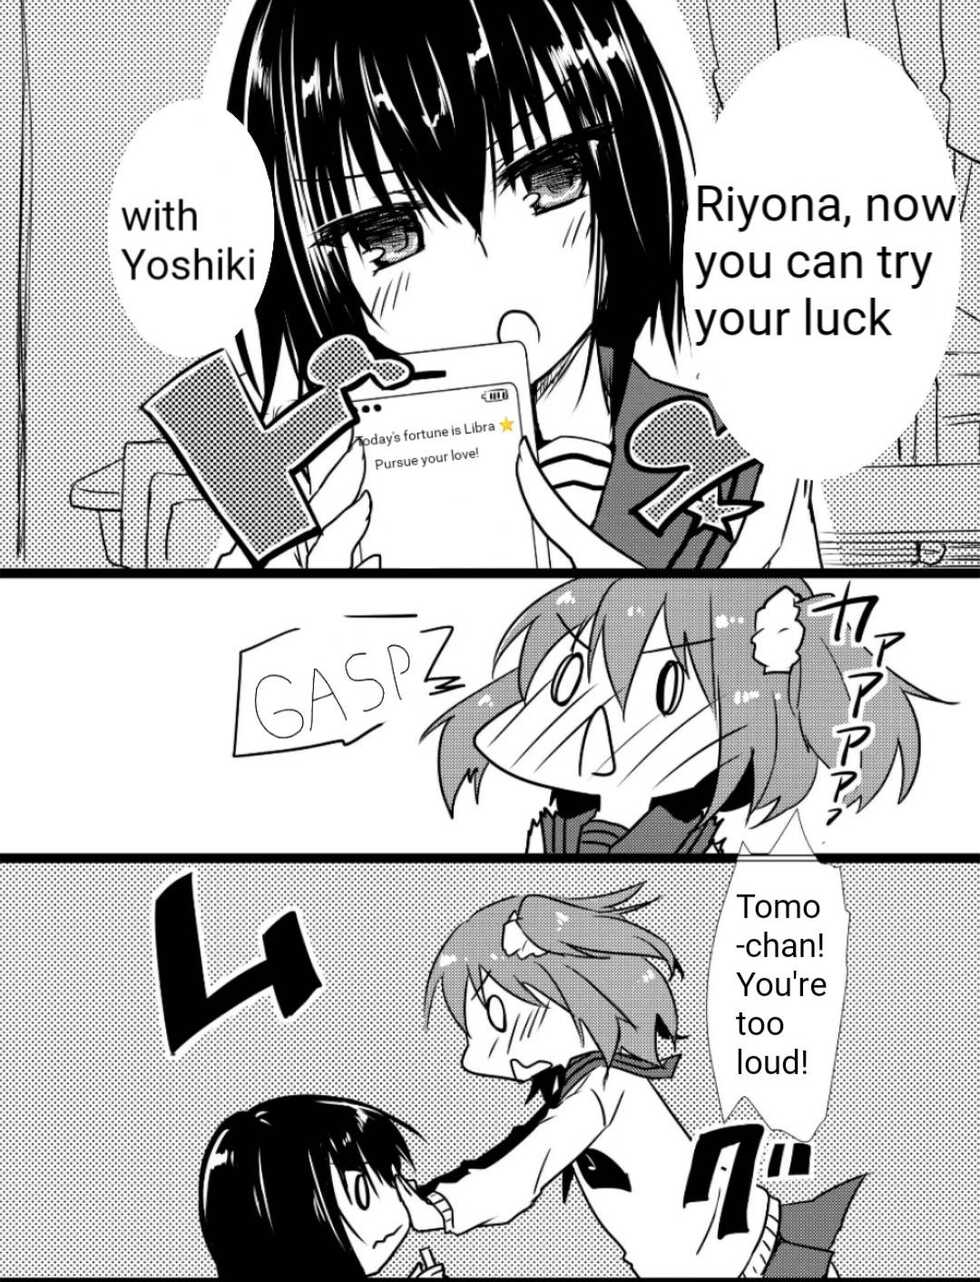 Riyona-chan is in Love - Page 3